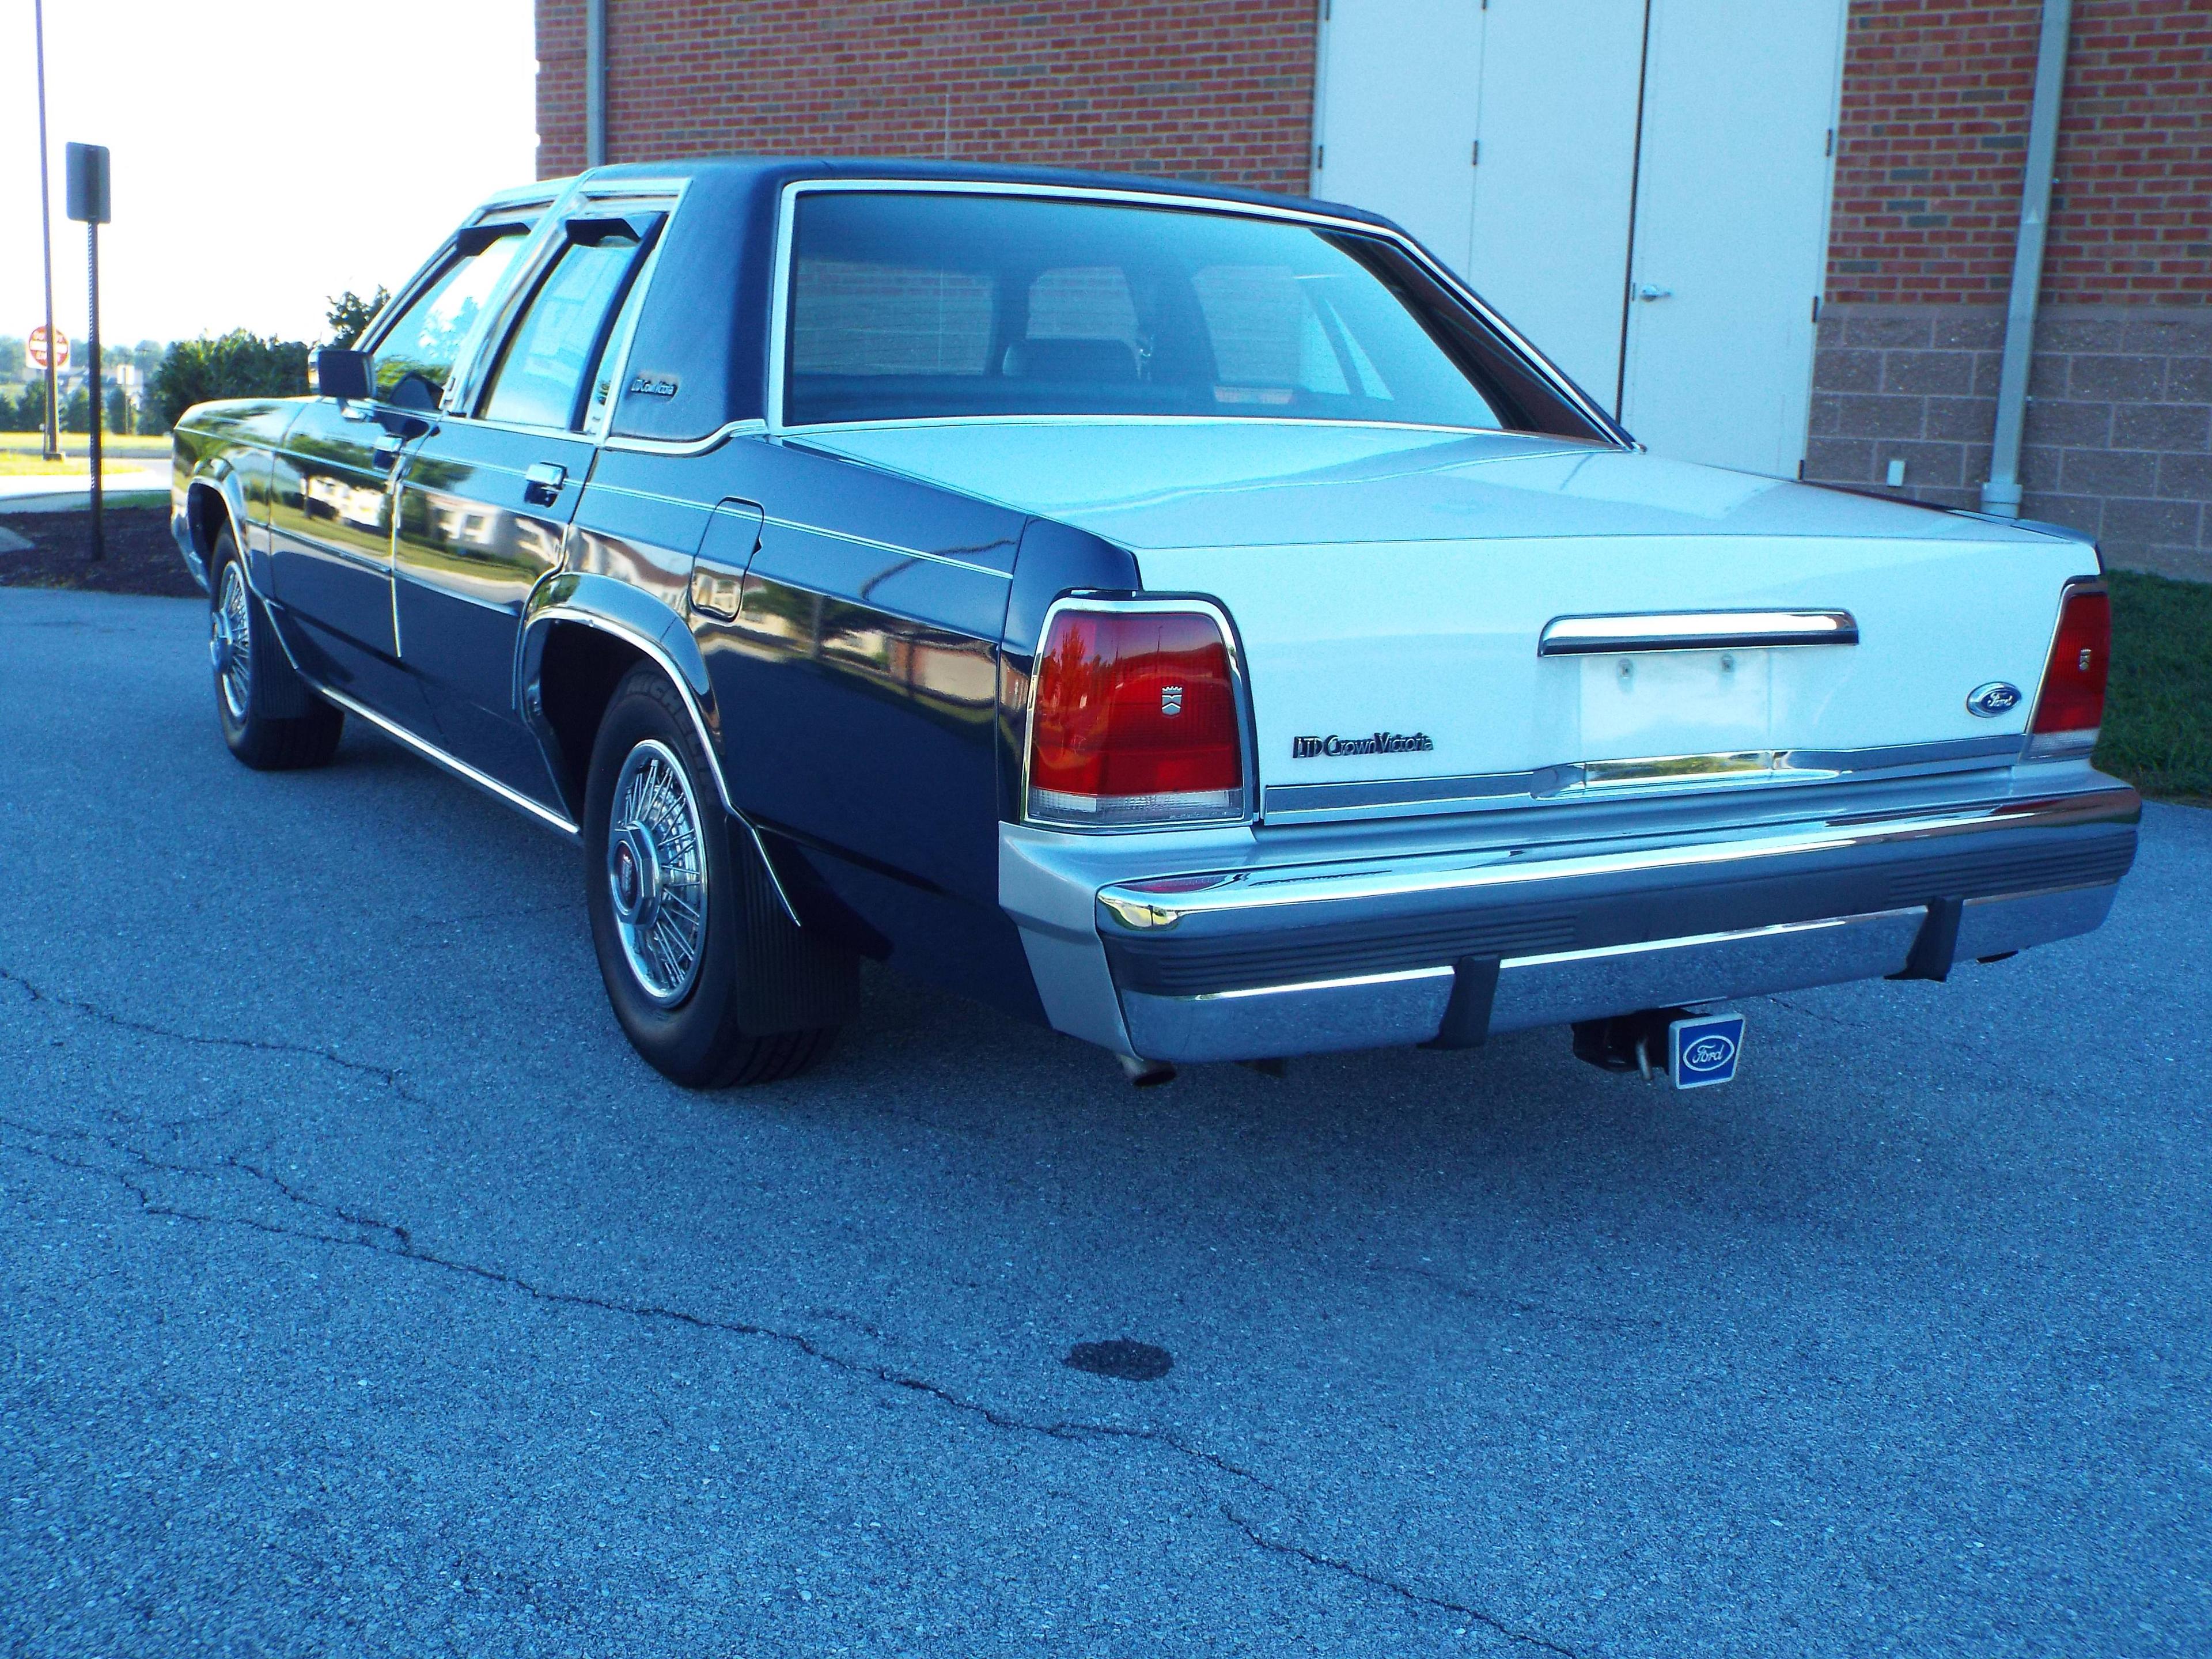 1988 Ford Crown Victoria Sedan. Very clean low mileage car. Ordered by the